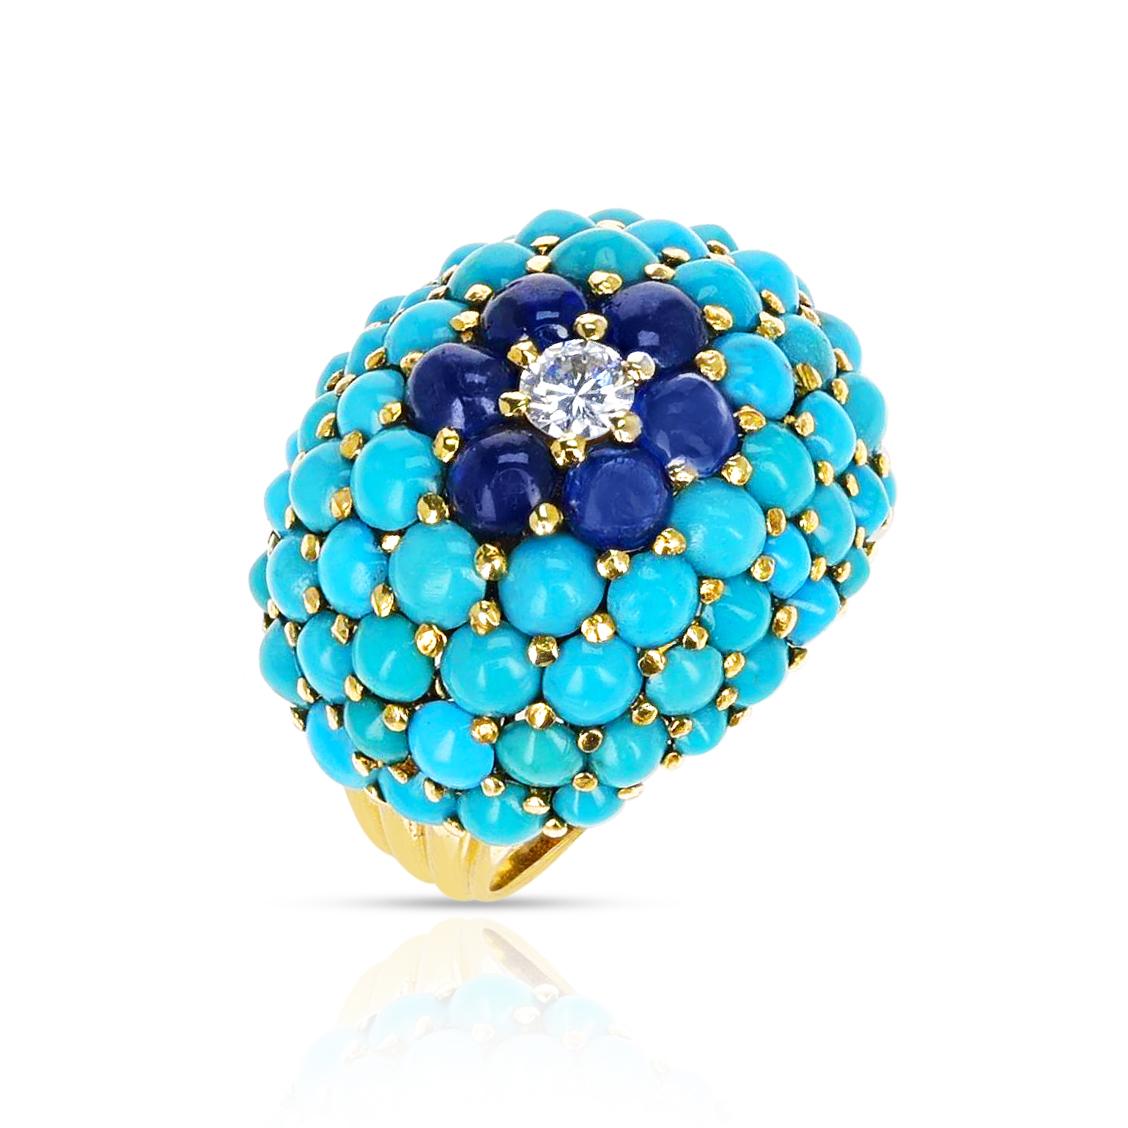 A Retro-Style Turquoise and Sapphire Cabochon Ring with Diamonds. The sapphires weigh appx. 1.80 cts. and the diamonds weigh 0.20 cts. The ring is made in 18k Yellow Gold. Matching Earrings available.

SKU: 1041-RAGTJAY